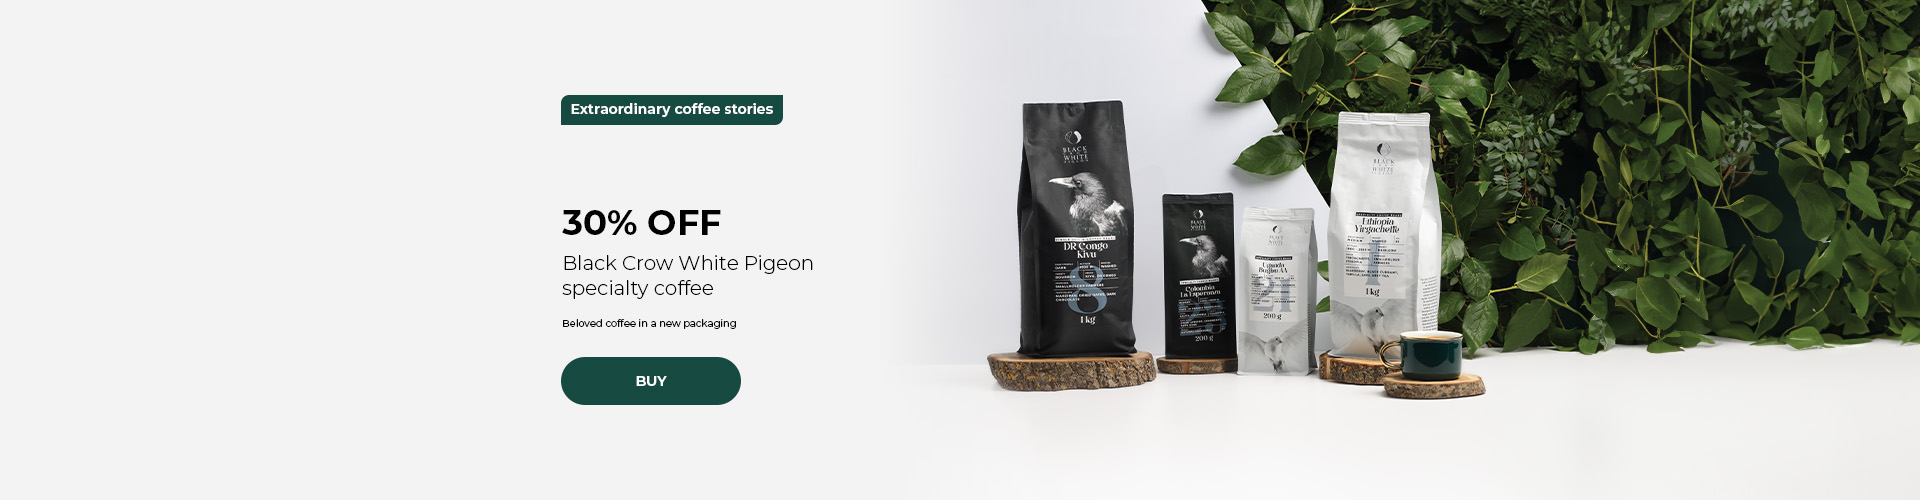 30% OFF Black Crow White Pigeon specialty coffee